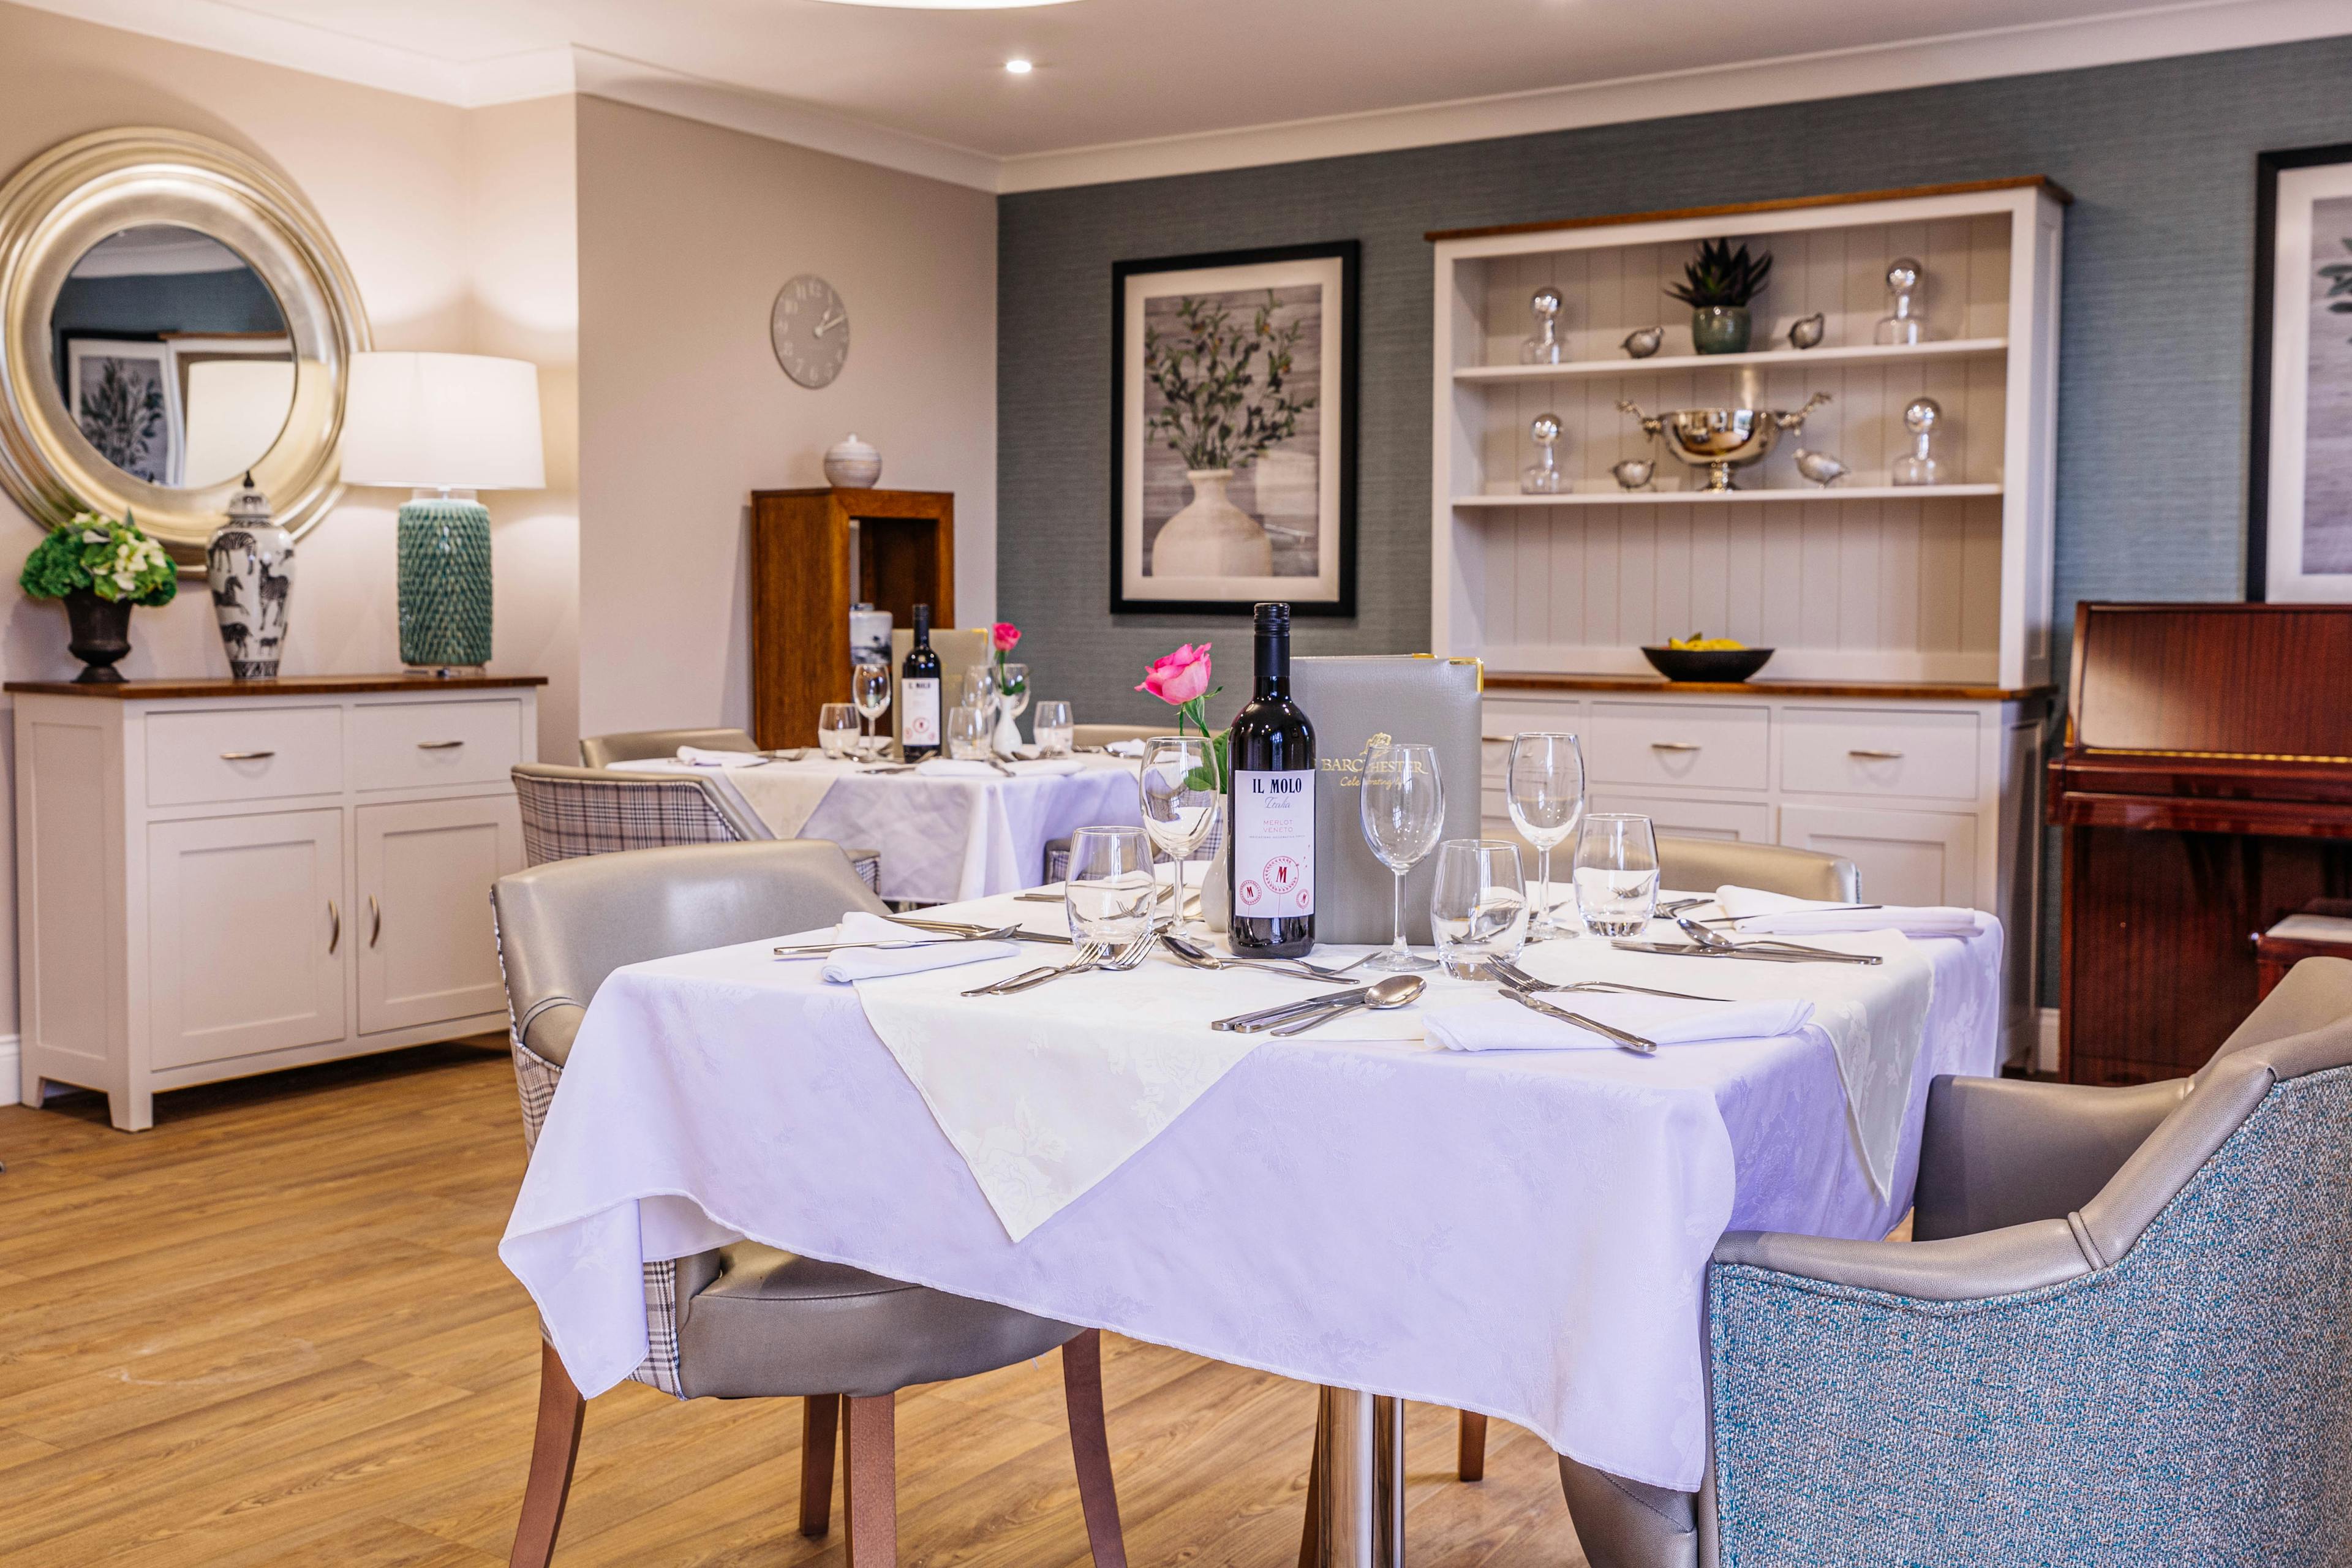 Dining Room at Magnolia Court Care Home in London, England